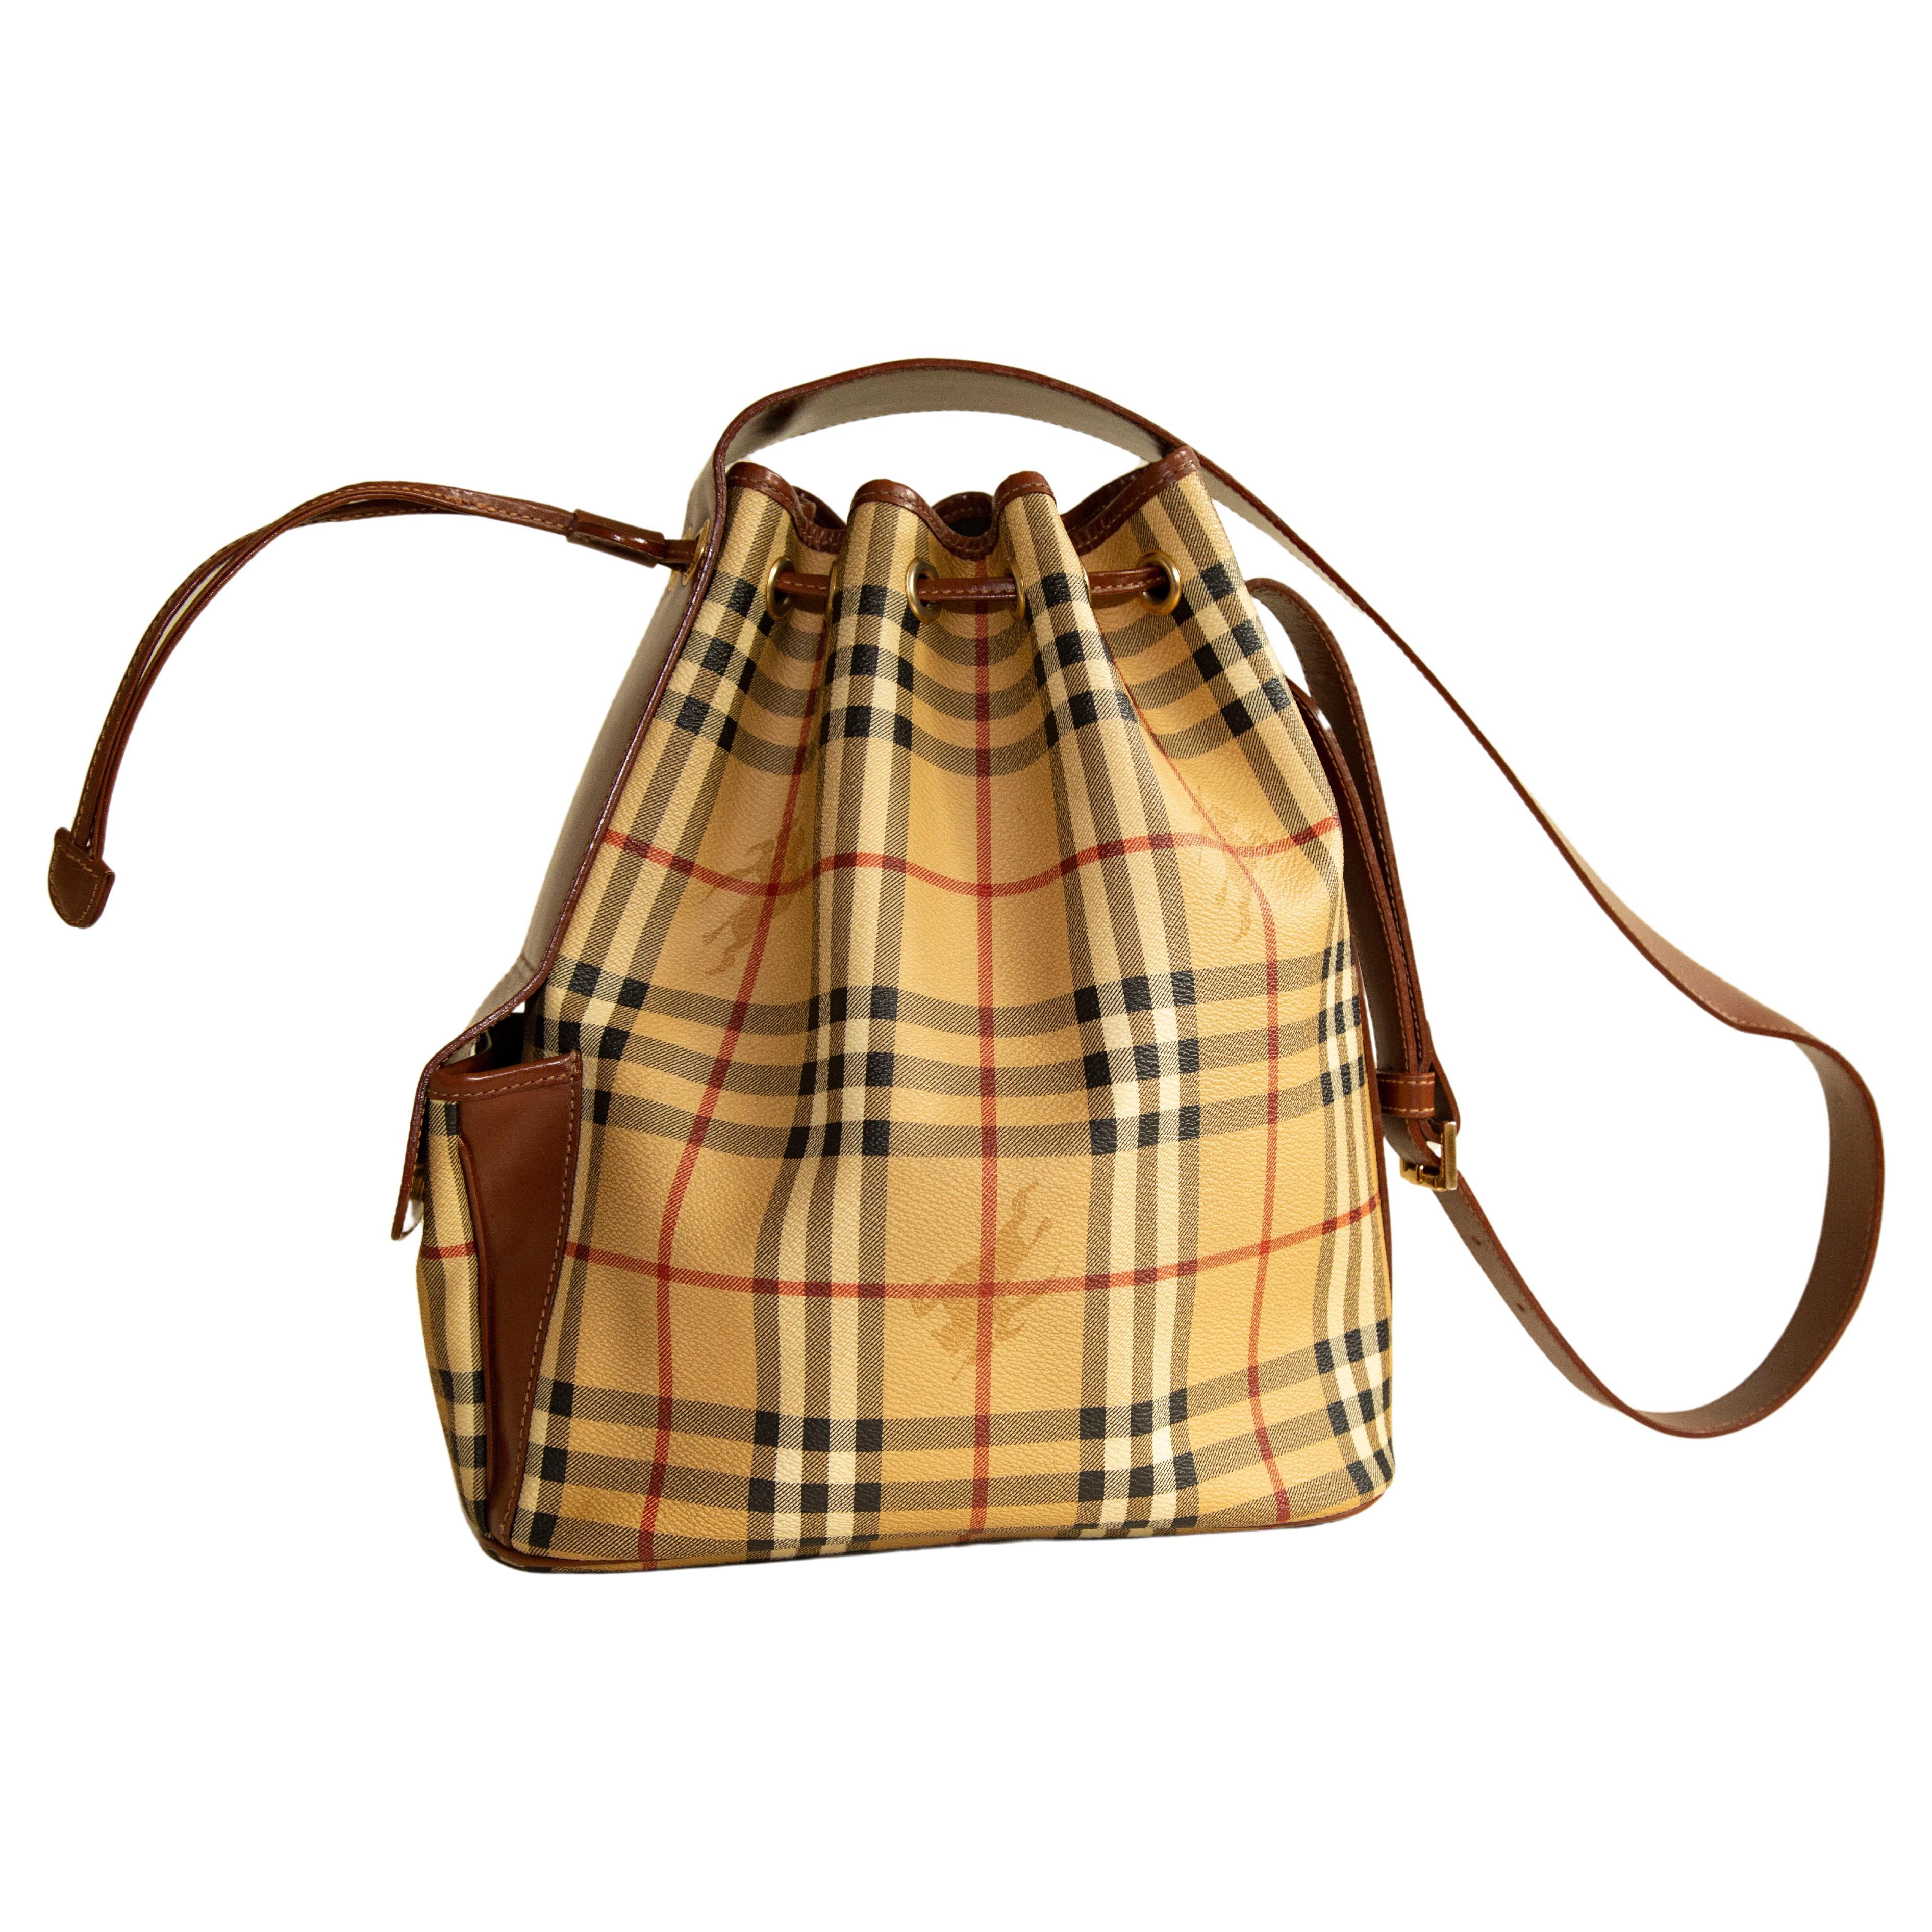 Burberry Bucket Bag in Classic Check Vinyl Coated Canvas 